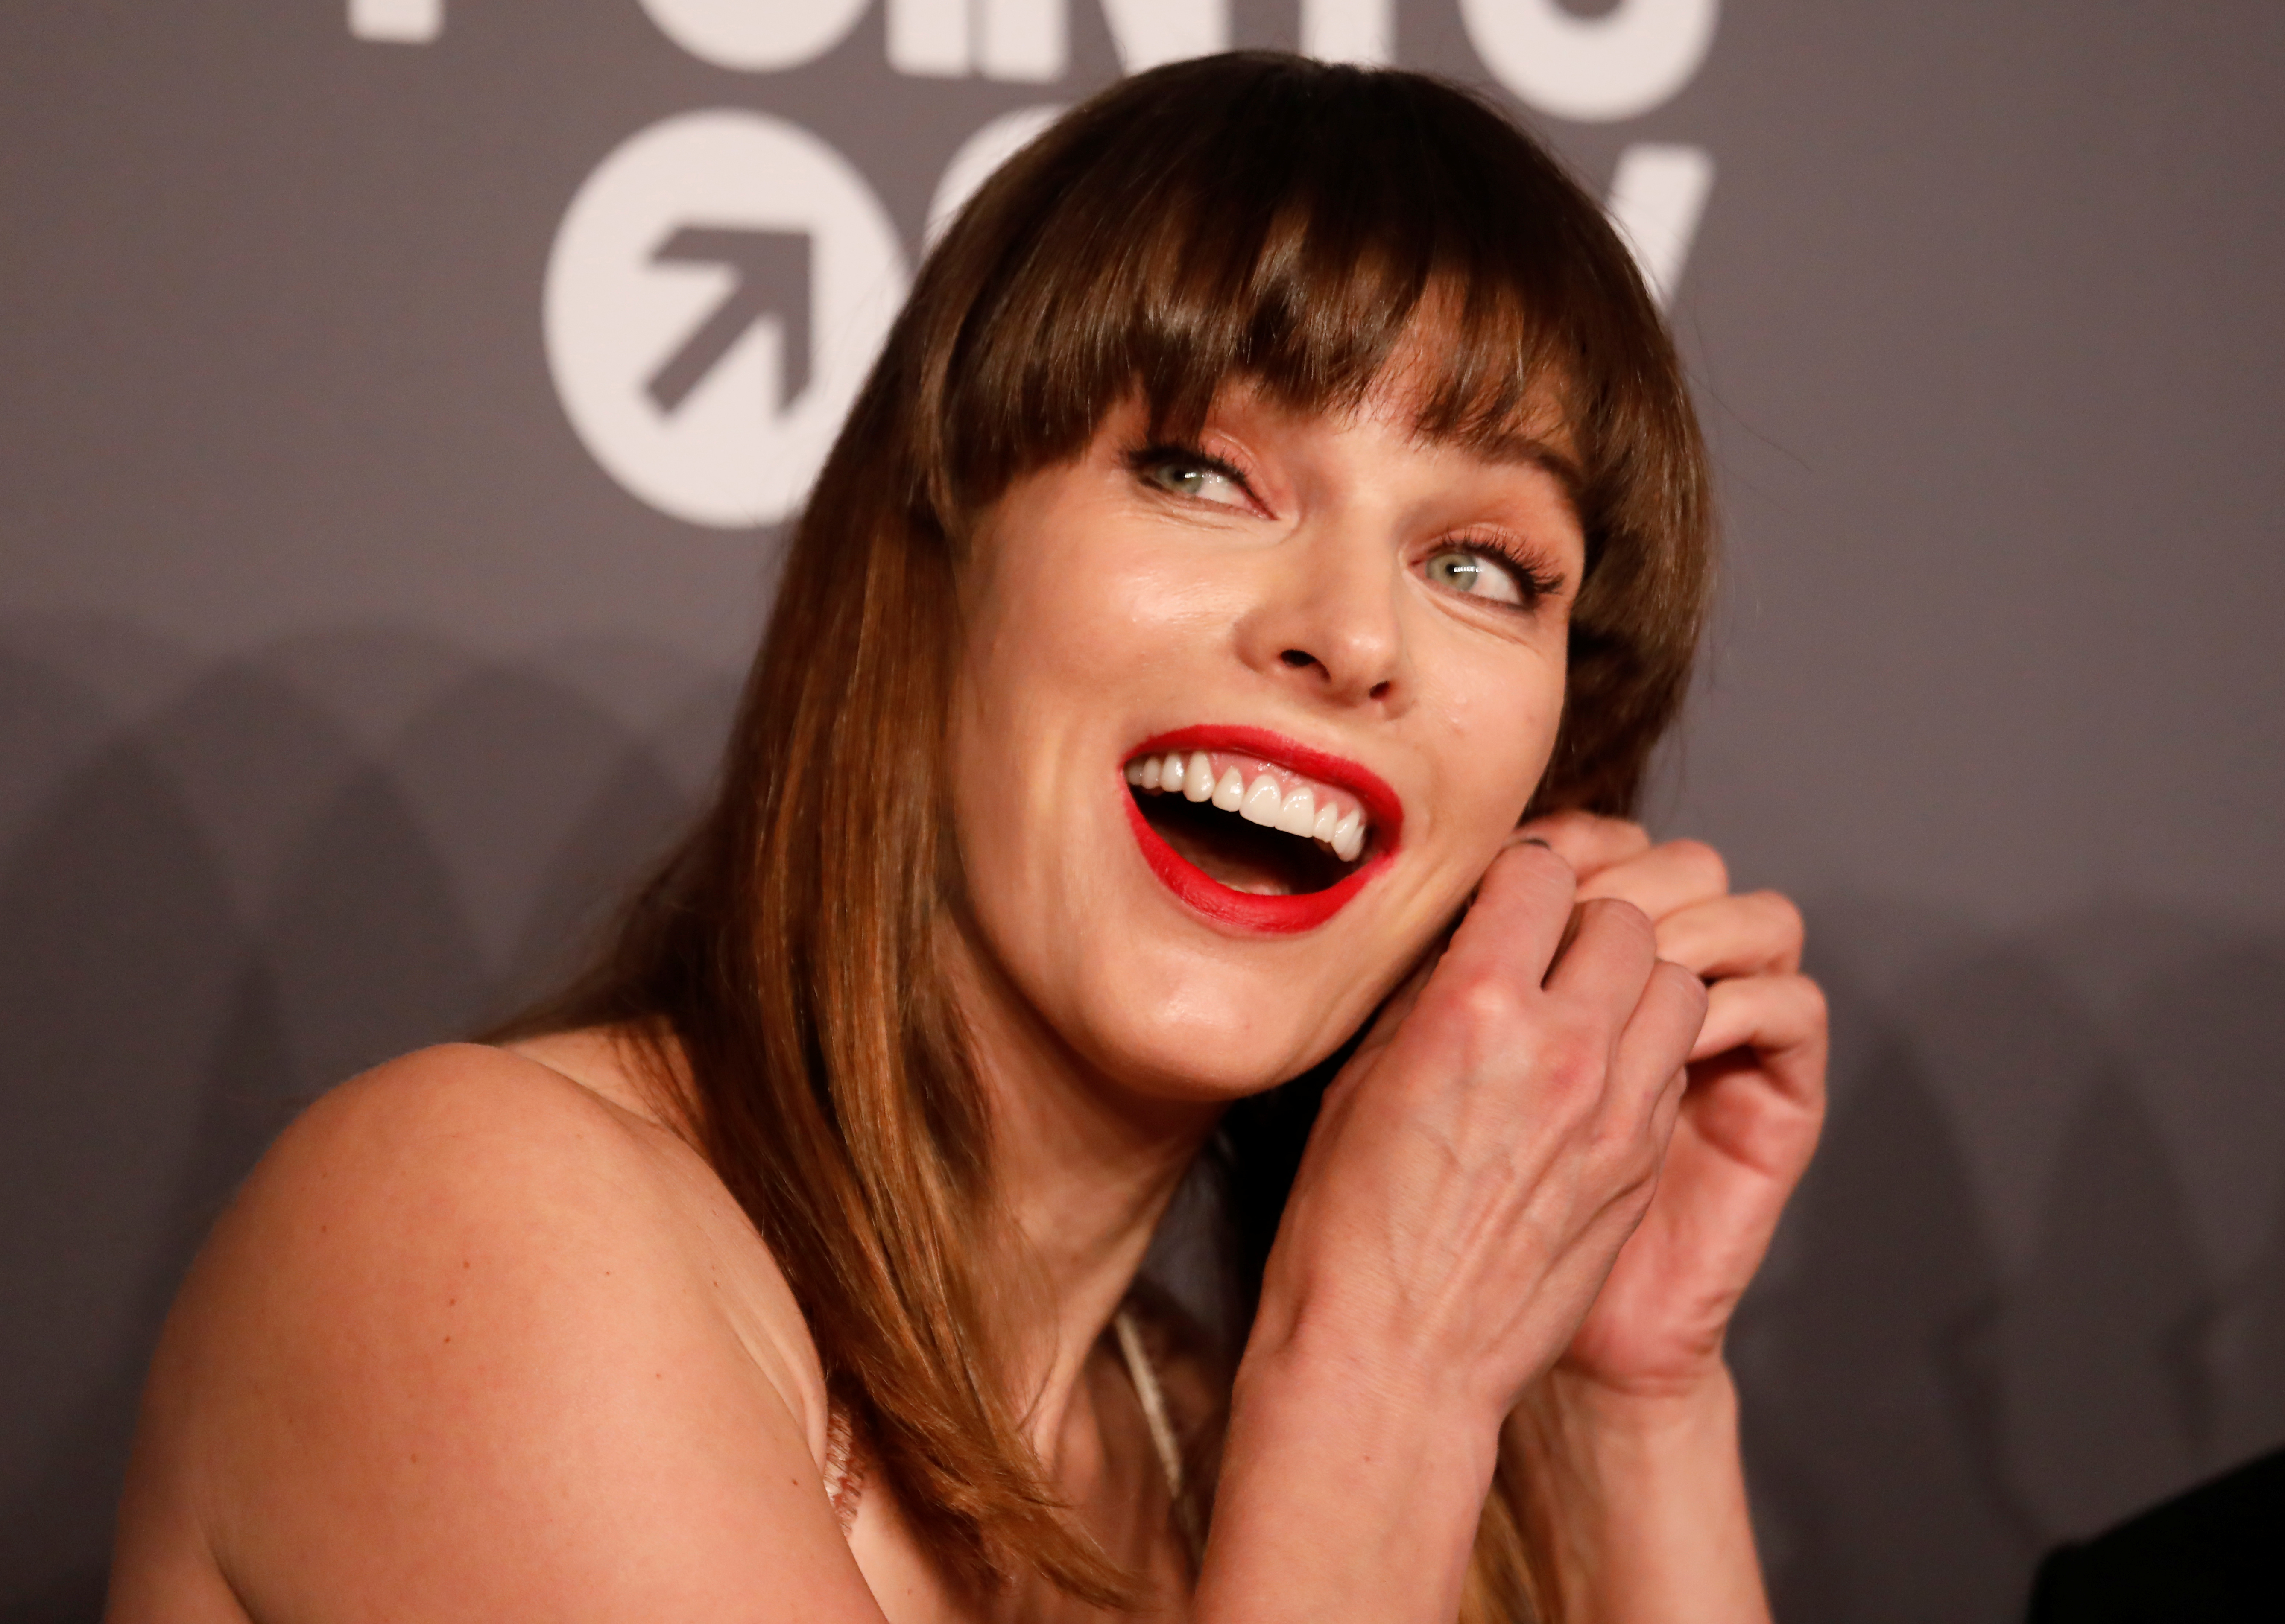 Milla Jovovich puts on her earring on the red carpet for the amfAR gala in New York, U.S., February 6, 2019. REUTERS/Shannon Stapleton 